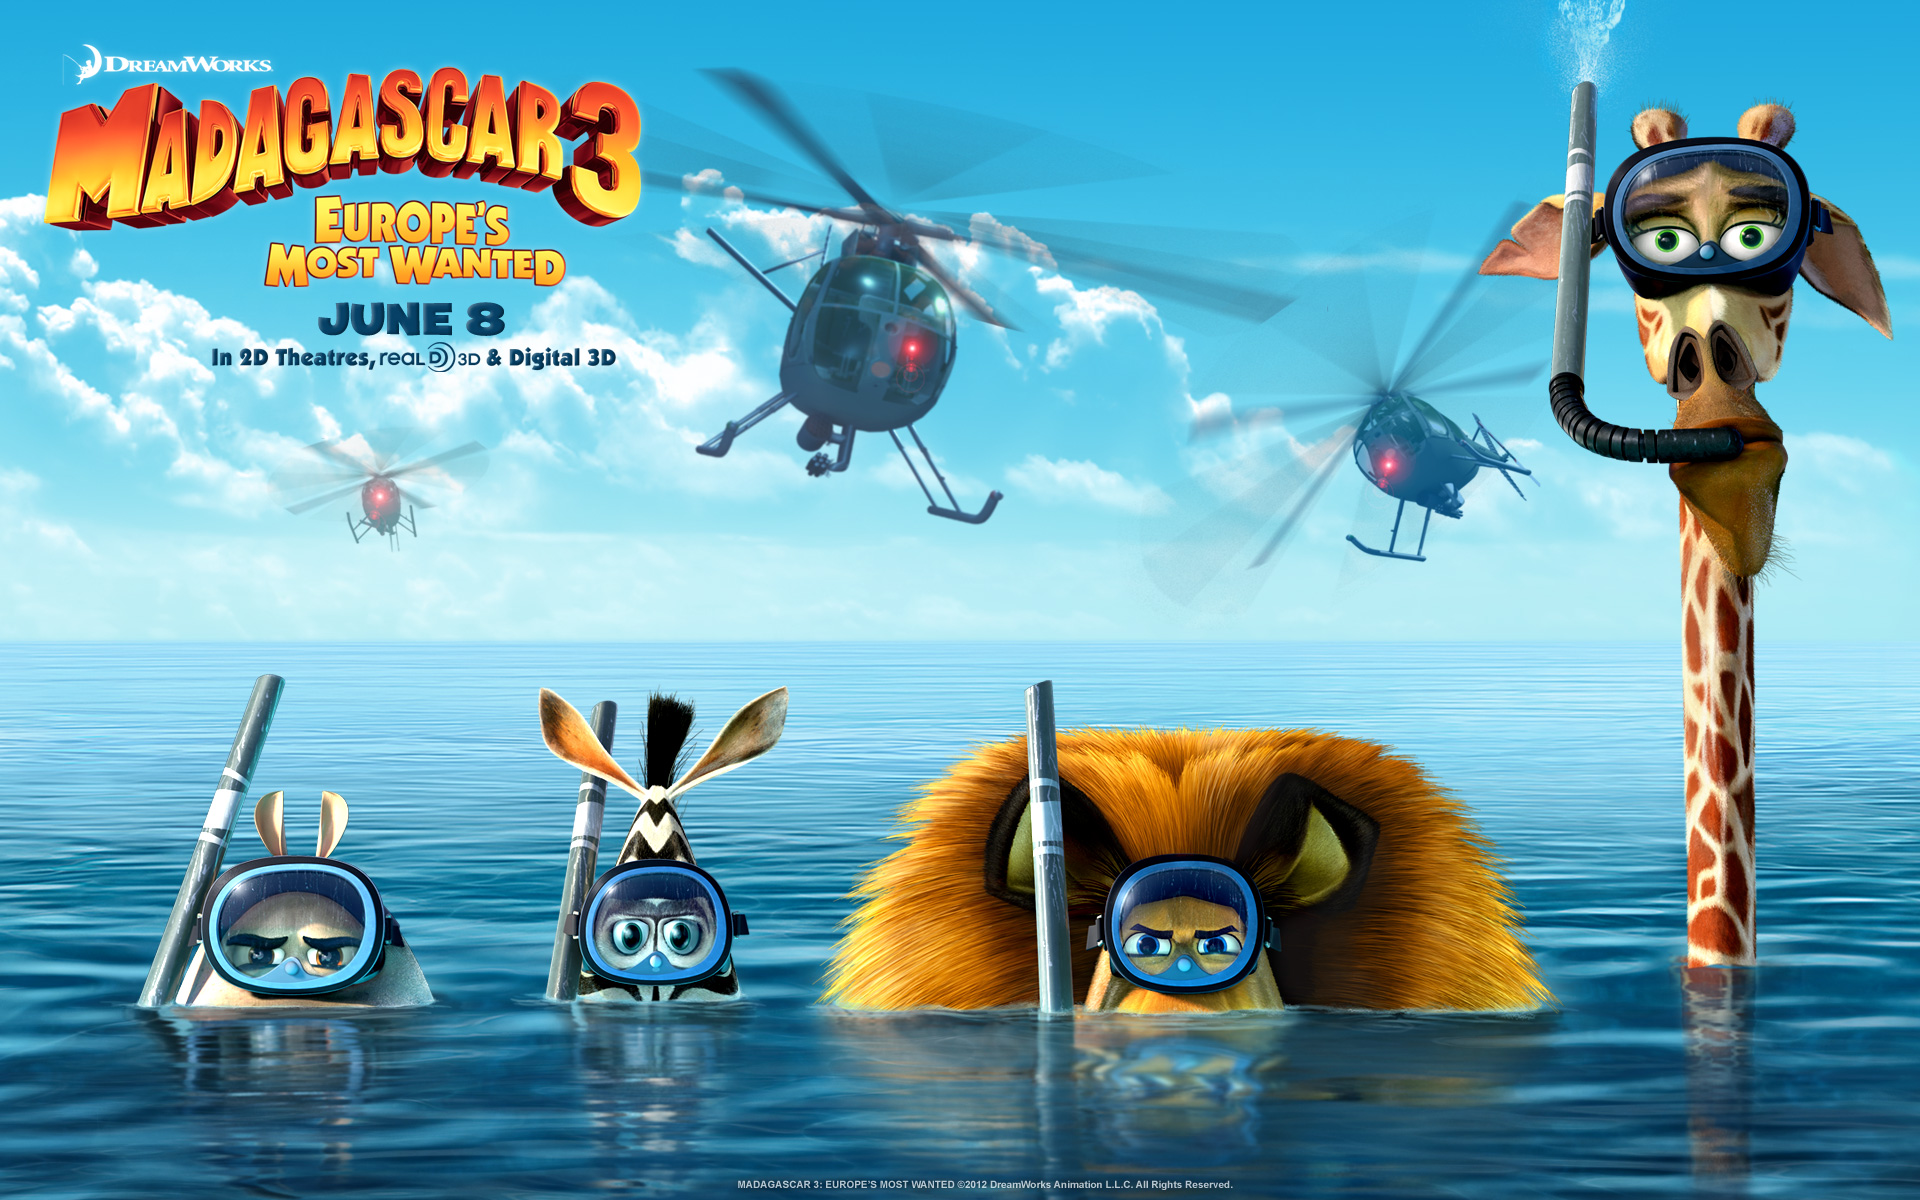 Madagascar 3 wallpaper 2 1920 - Exclusive YRB Interview With The Cast Of 'Madagascar 3'